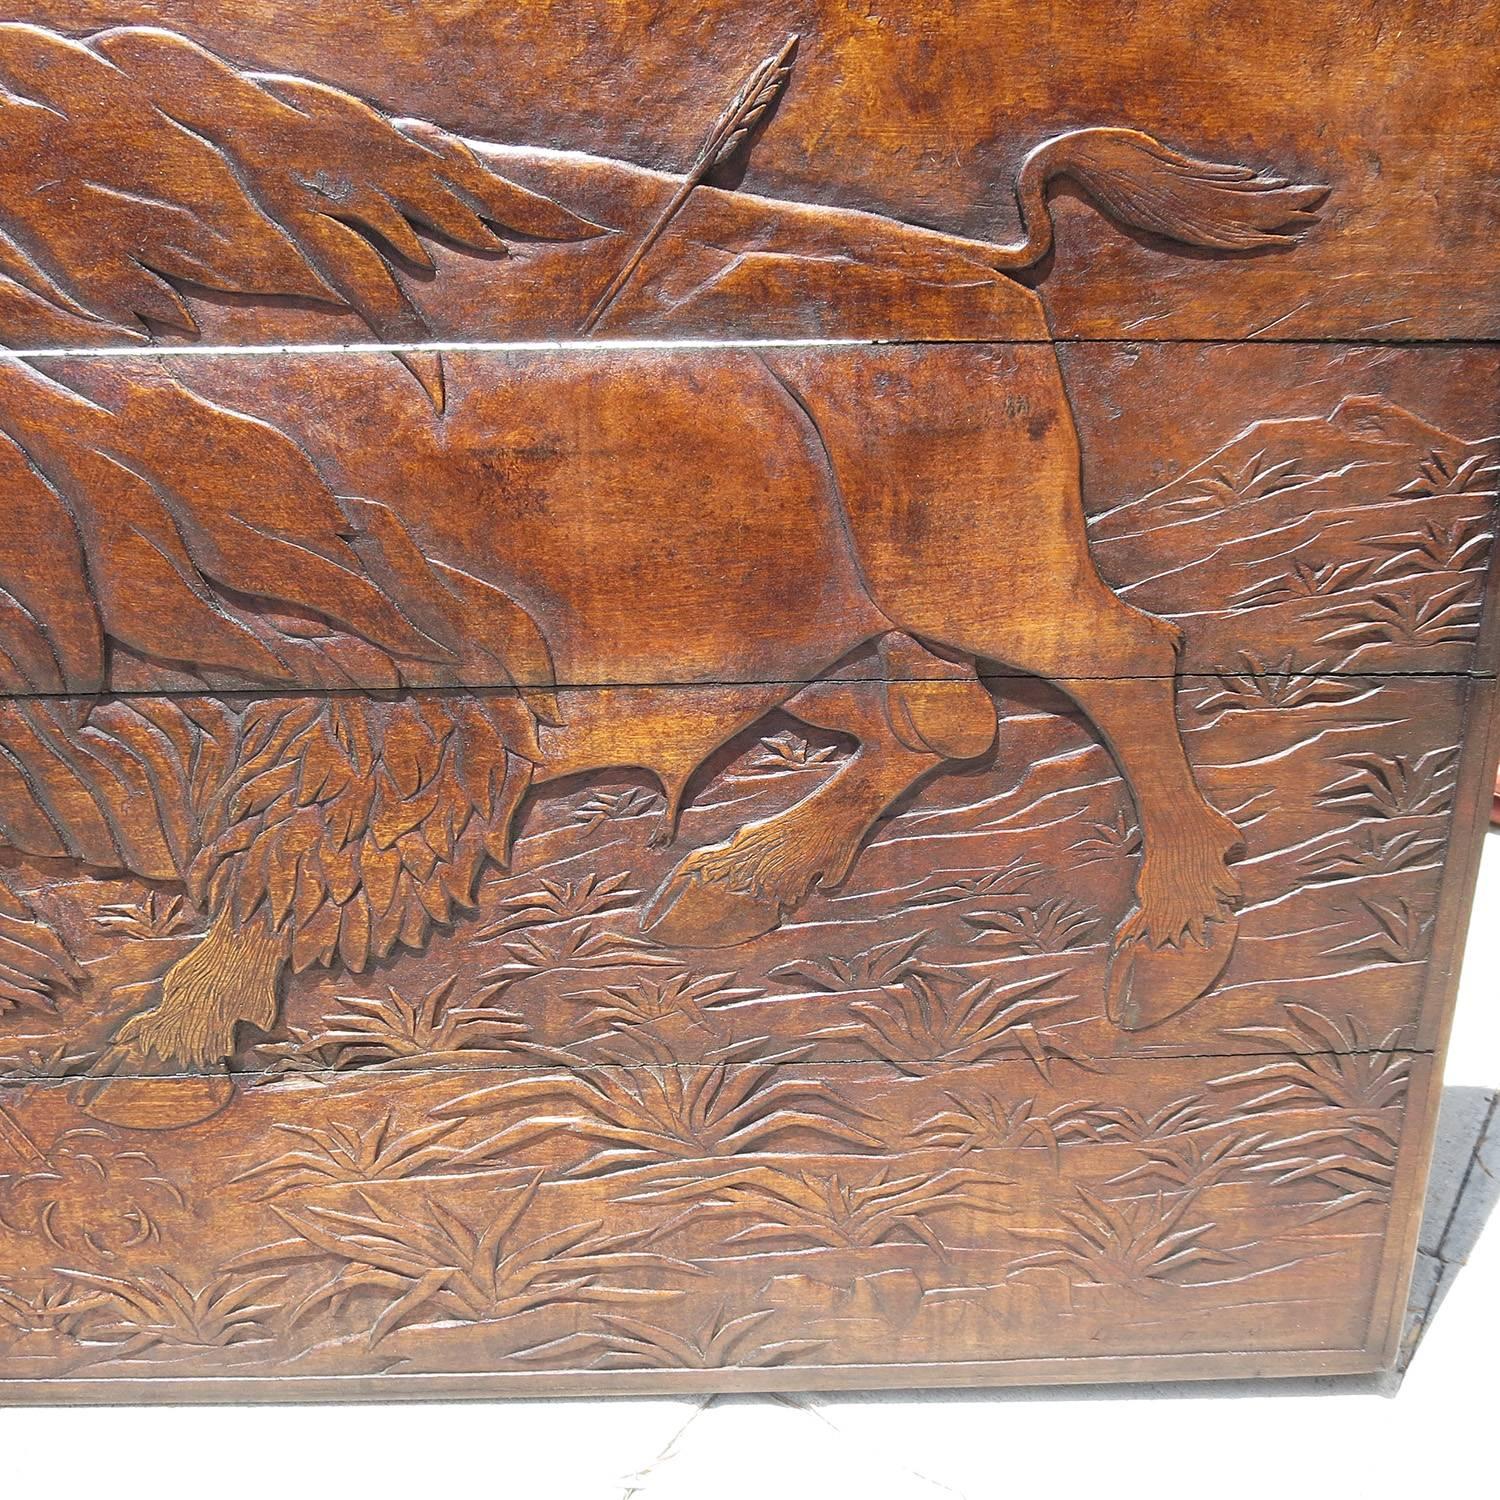 American Native Hunting Buffalo Carved Wooden Wall Panel Art by Leanora Oliver Nunn